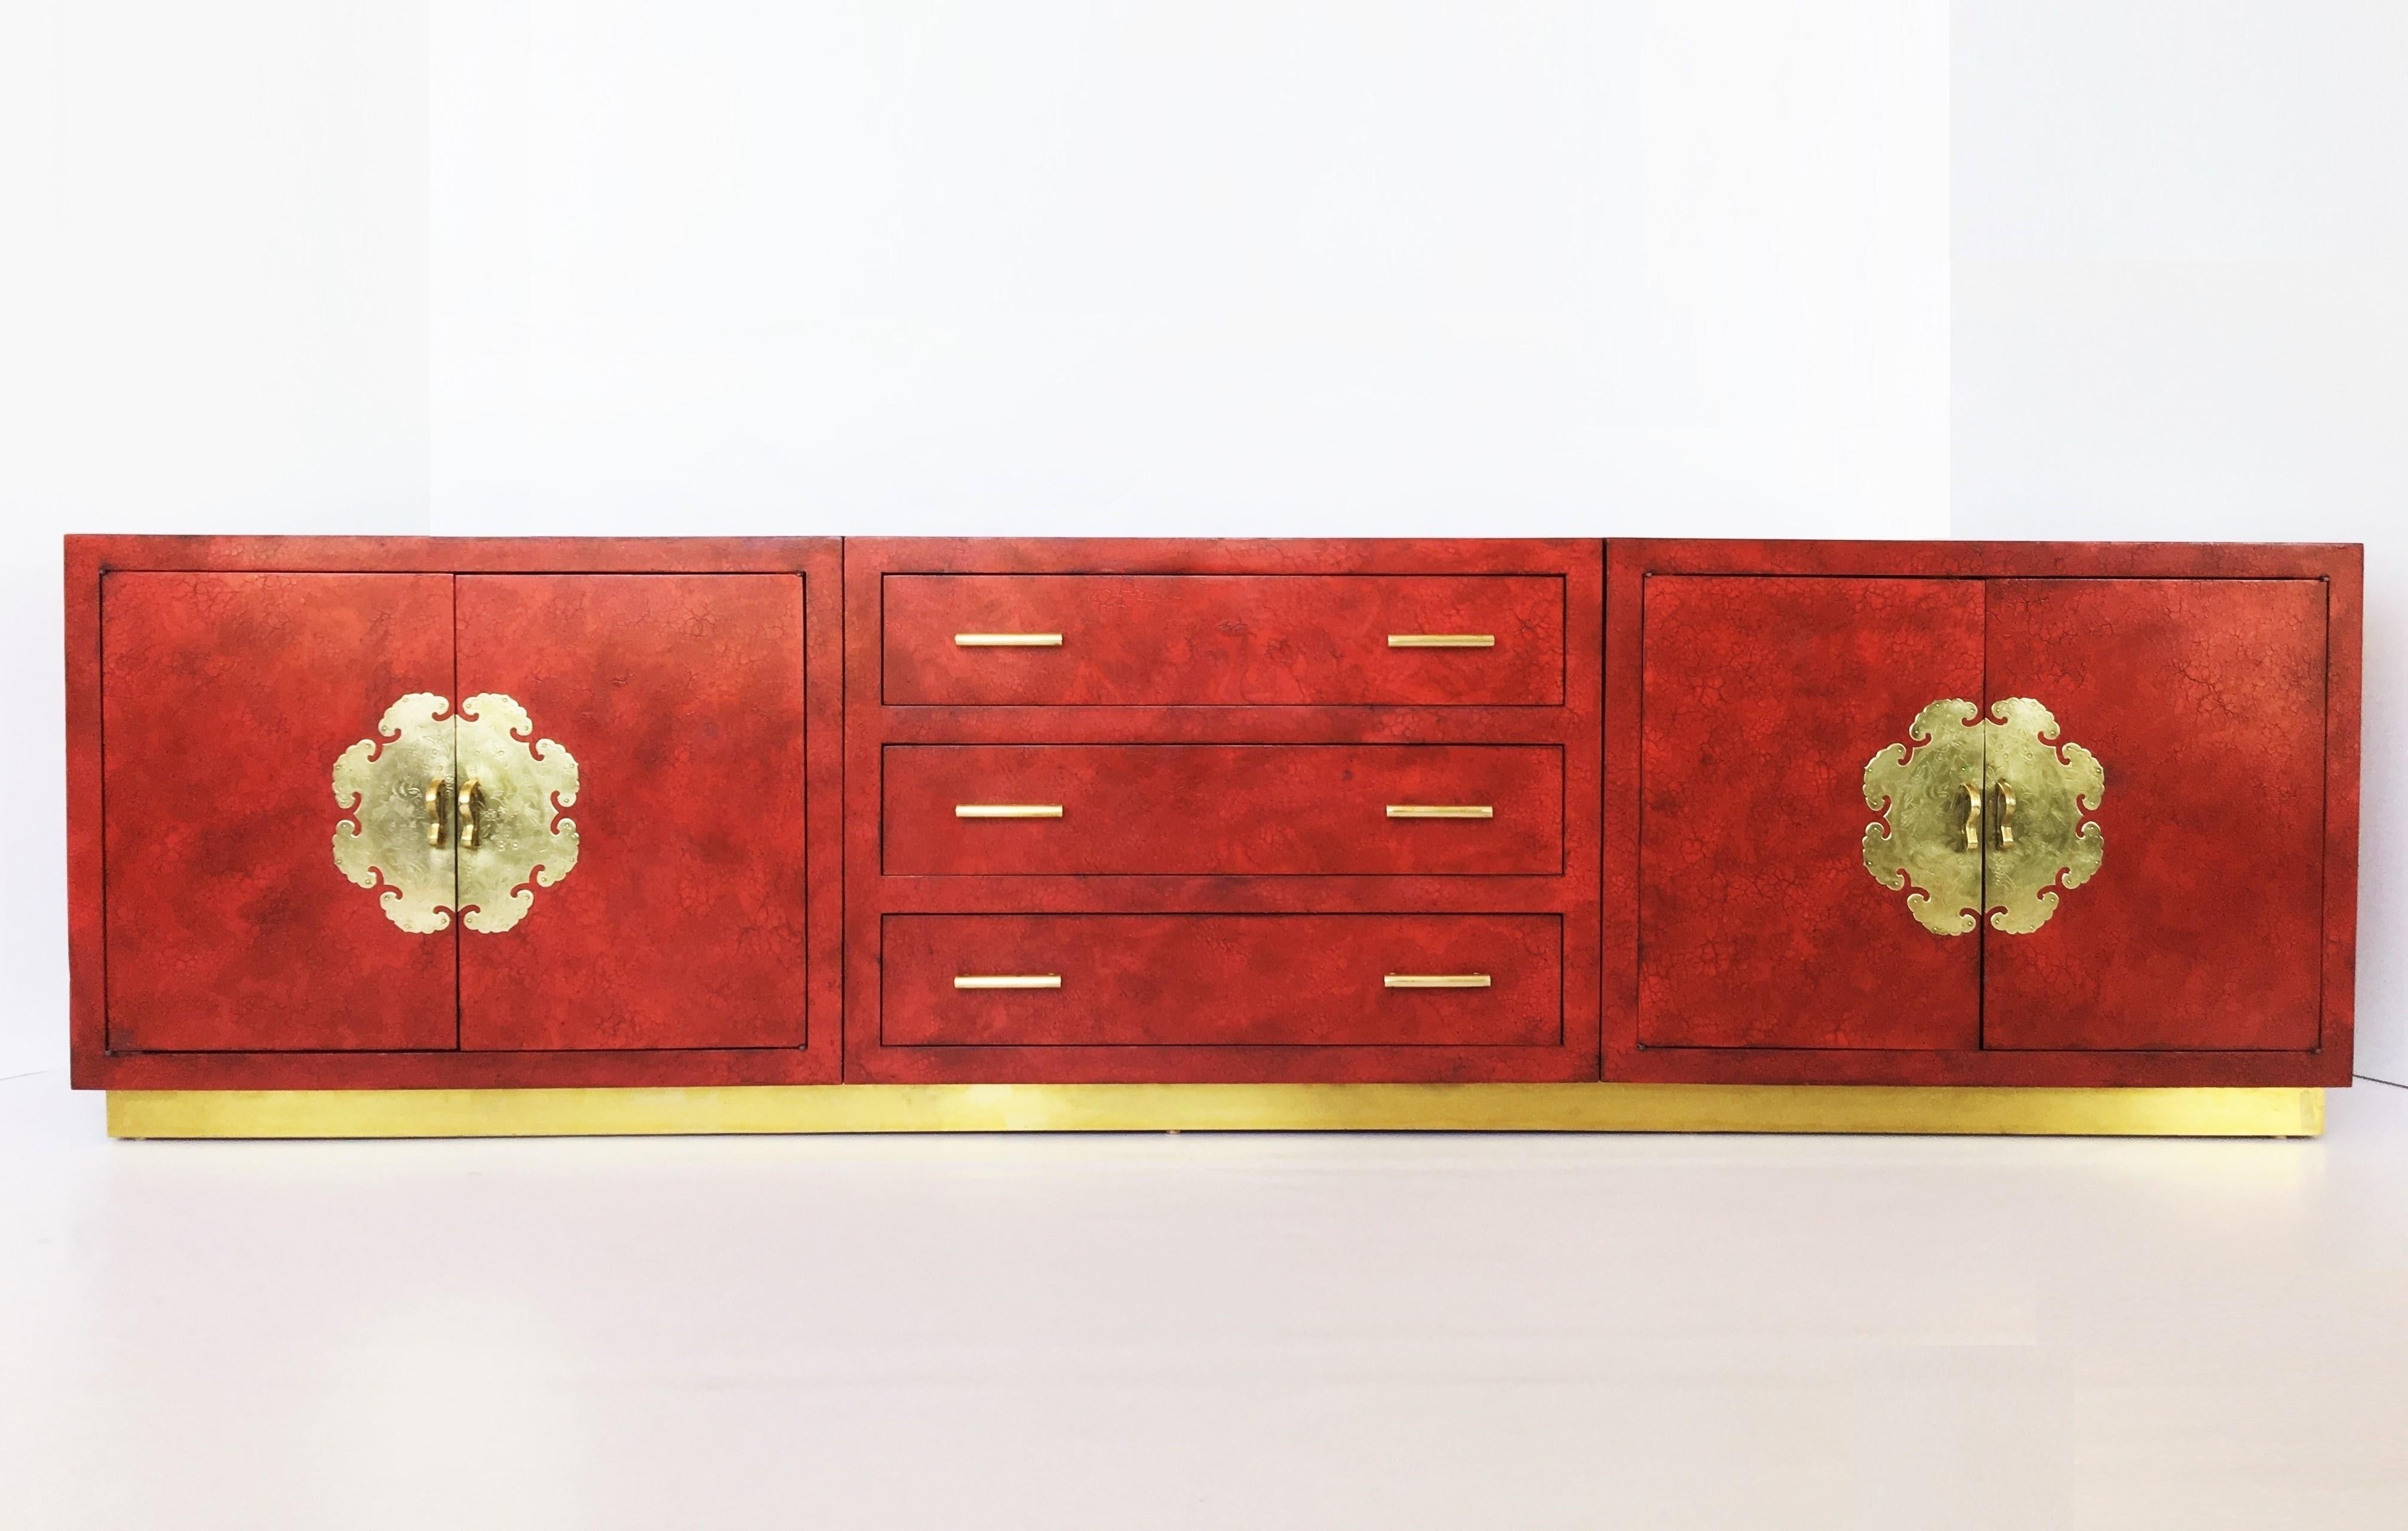 This stunning exceptionally sized sleek credenza or sideboard, channeling old Hollywood with a touch of the orient. Made of solid wood, featuring a custom lacquer finish. Three wide central drawers flanked by pair of cabinet doors adorned with